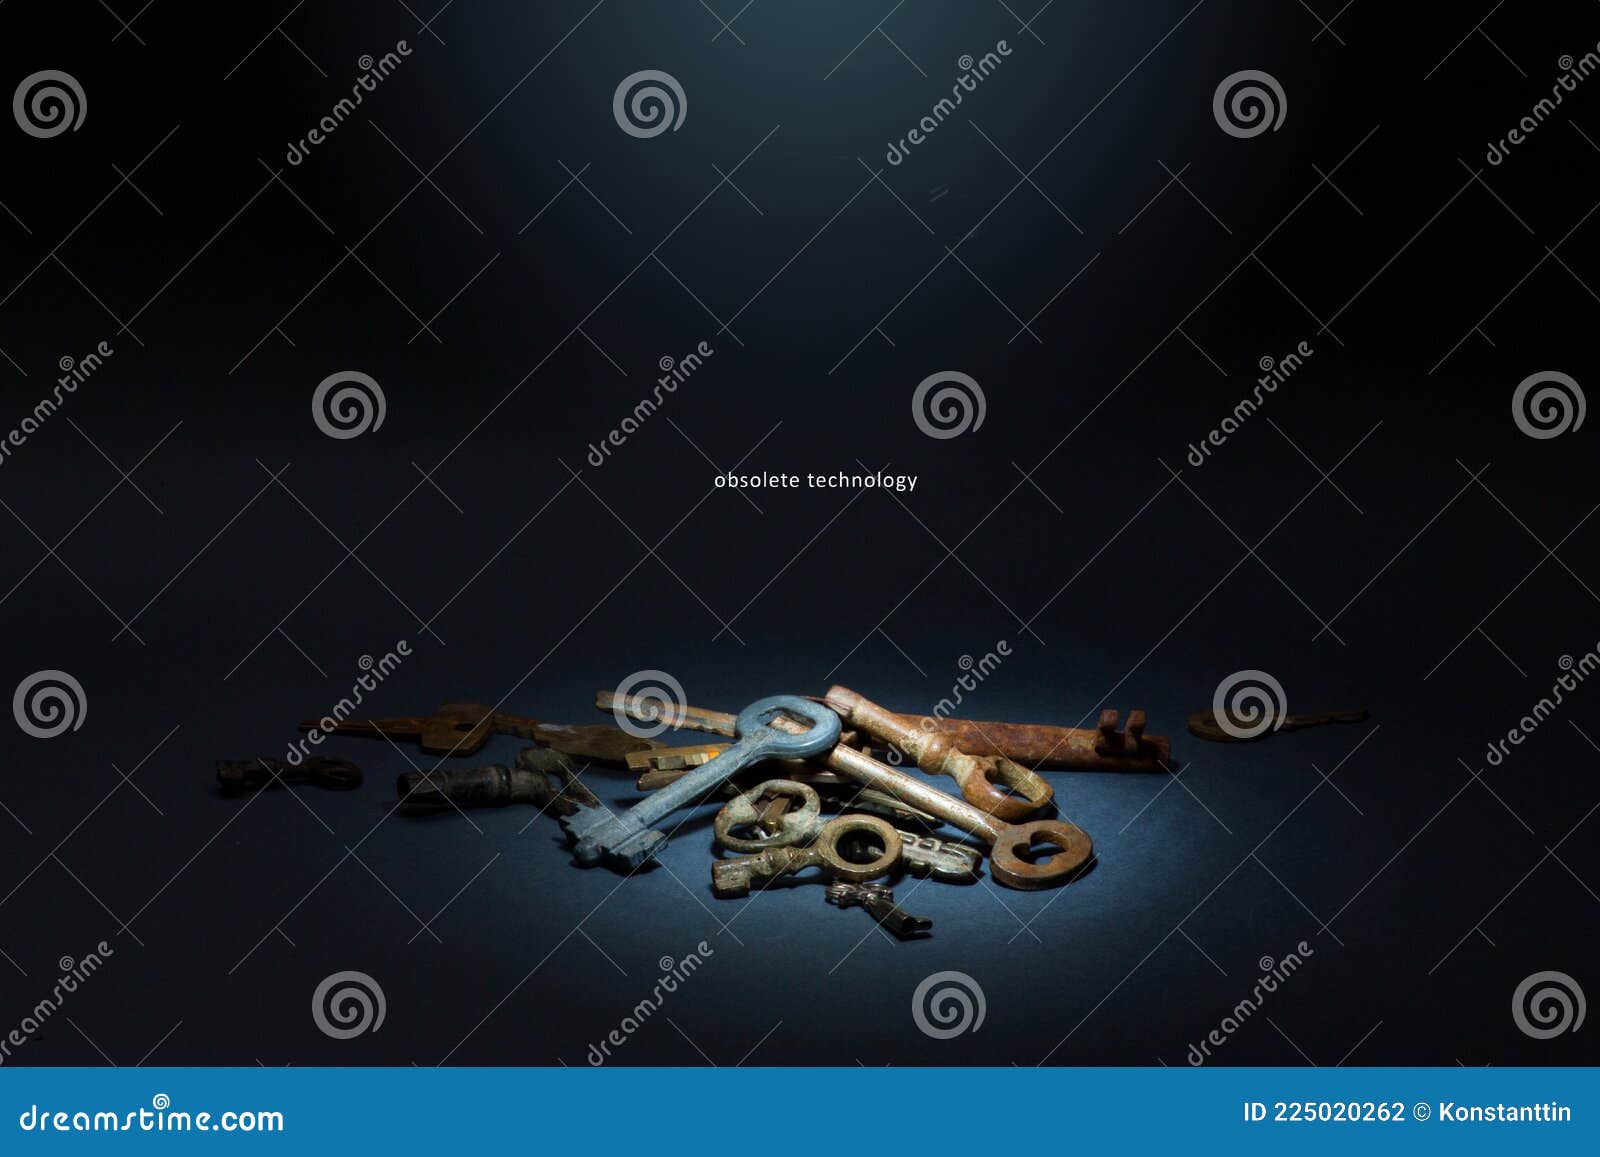 art bunch of old unnecessary keys on a dark background. obsolete technology concept